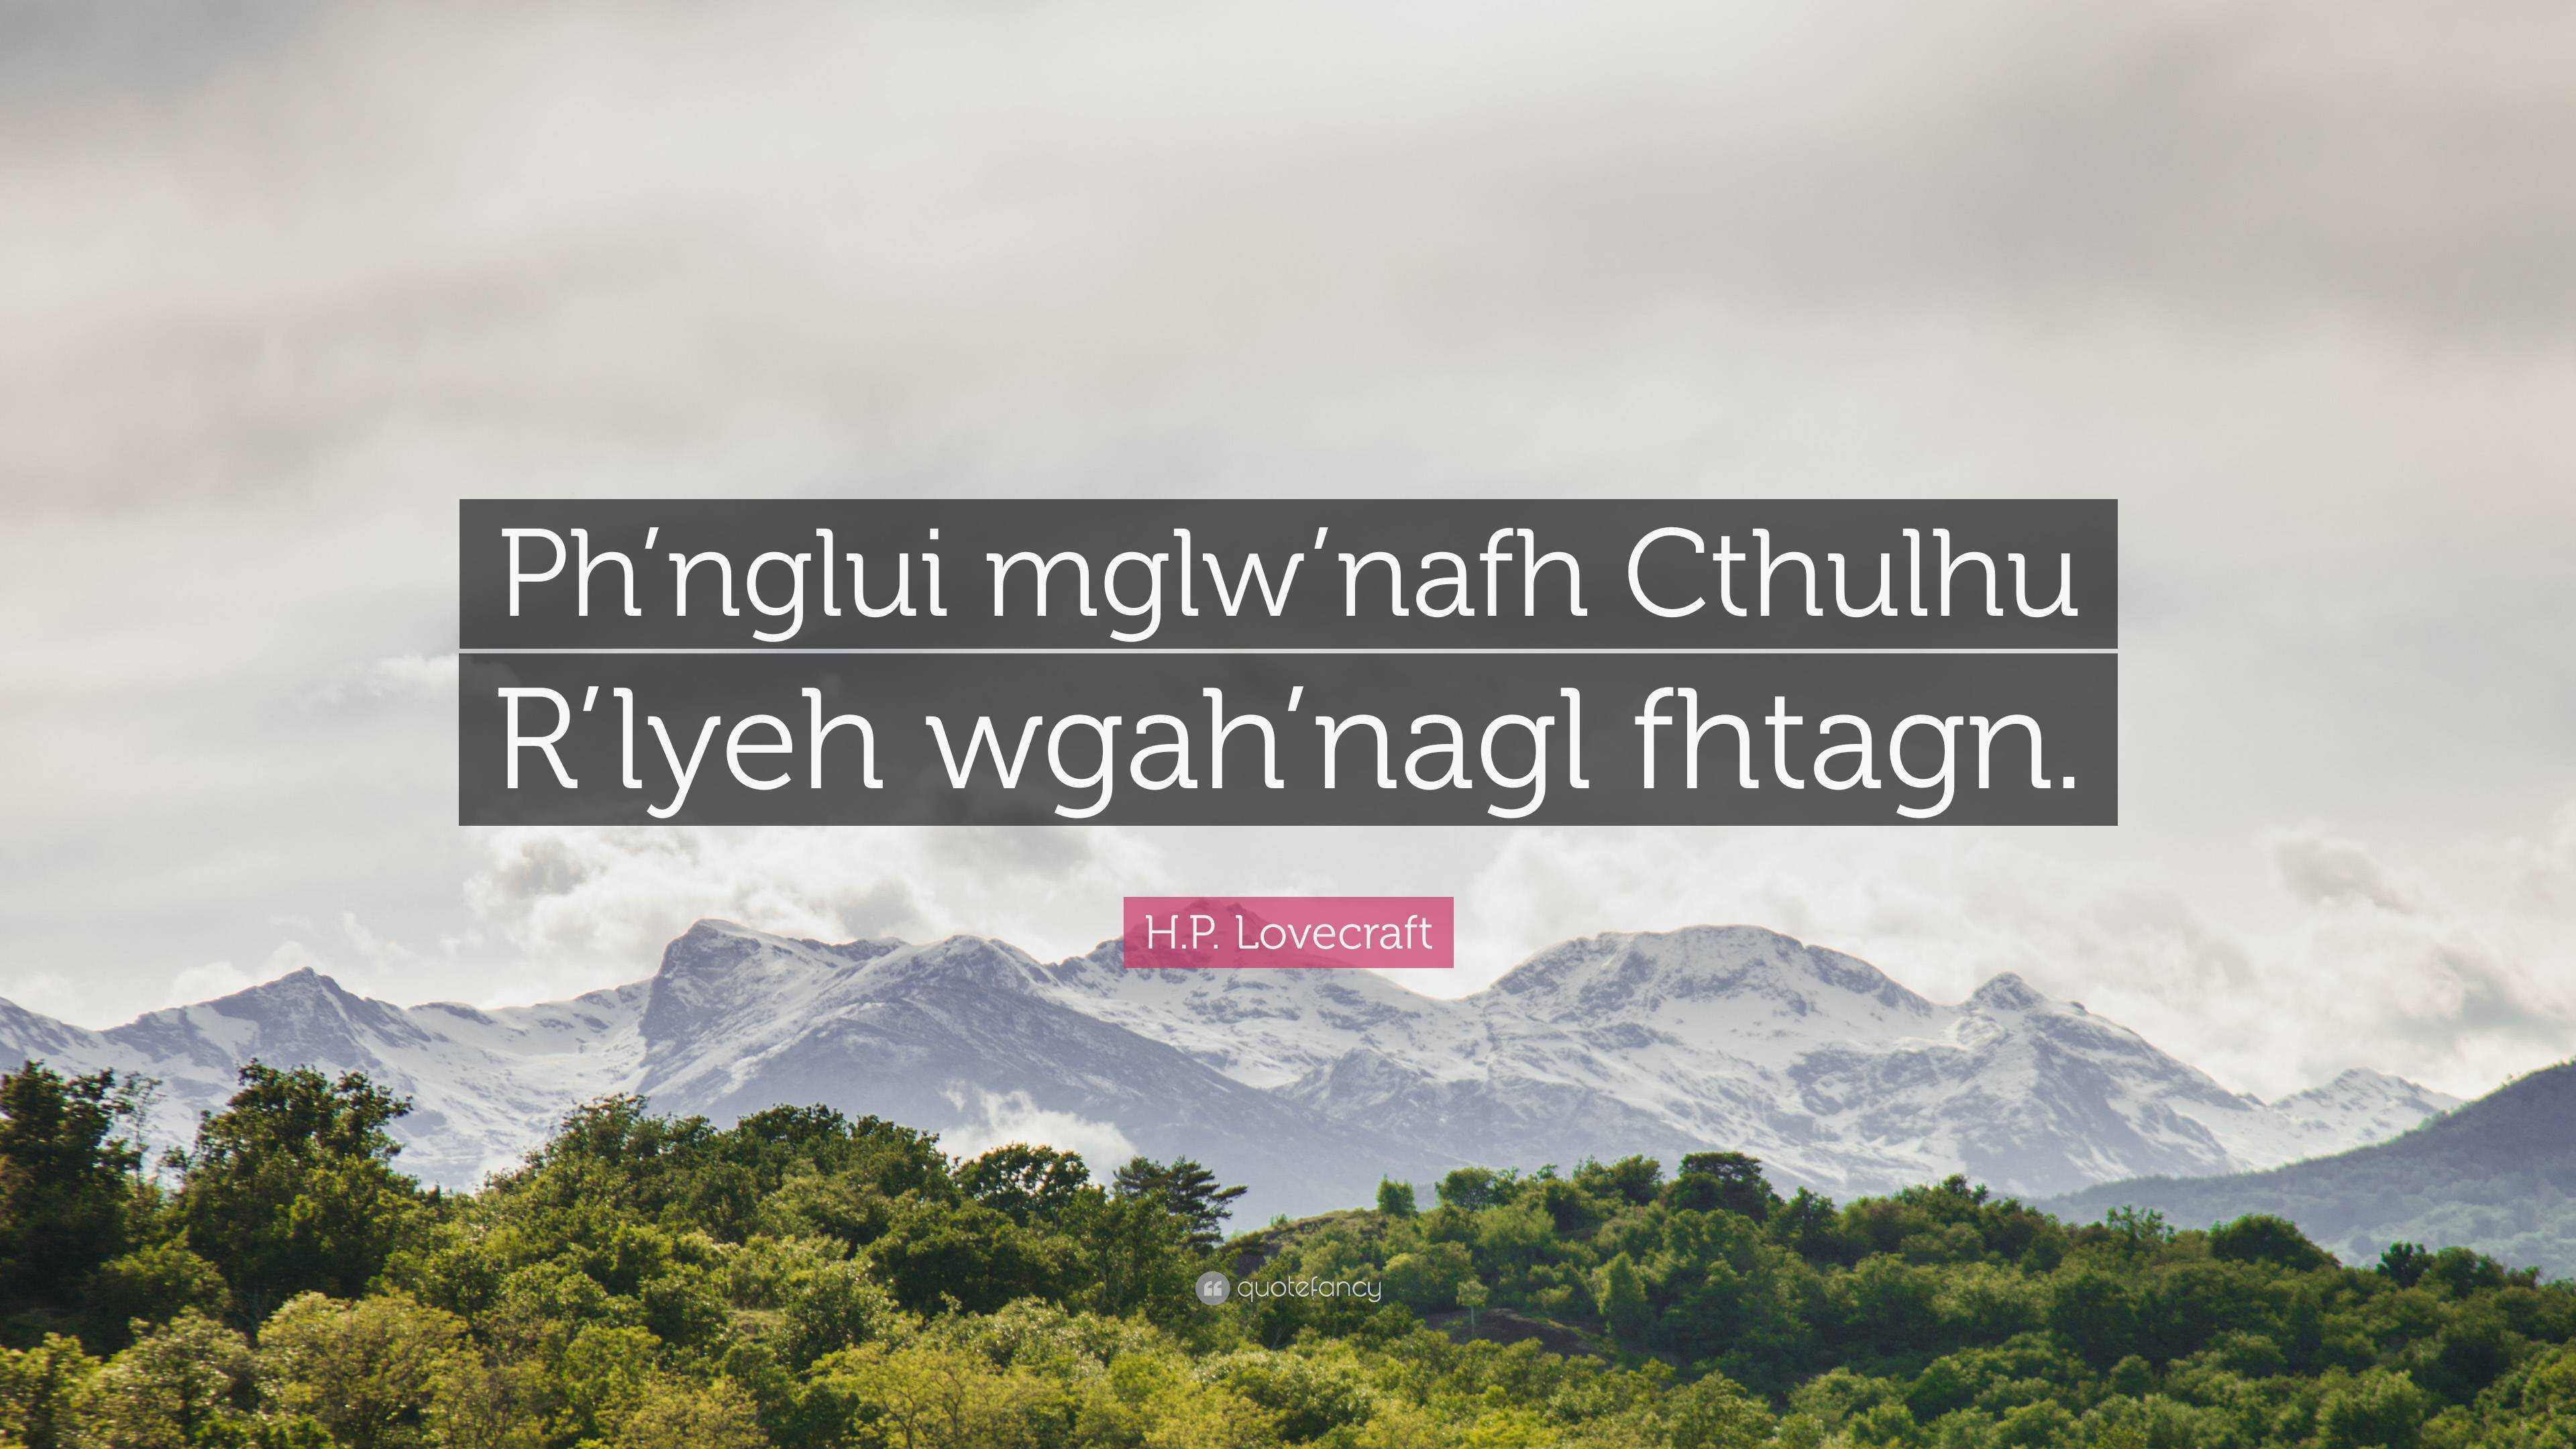 H P Lovecraft Quote Ph Nglui Mglw Nafh Cthulhu R Lyeh Wgah Nagl Fhtagn